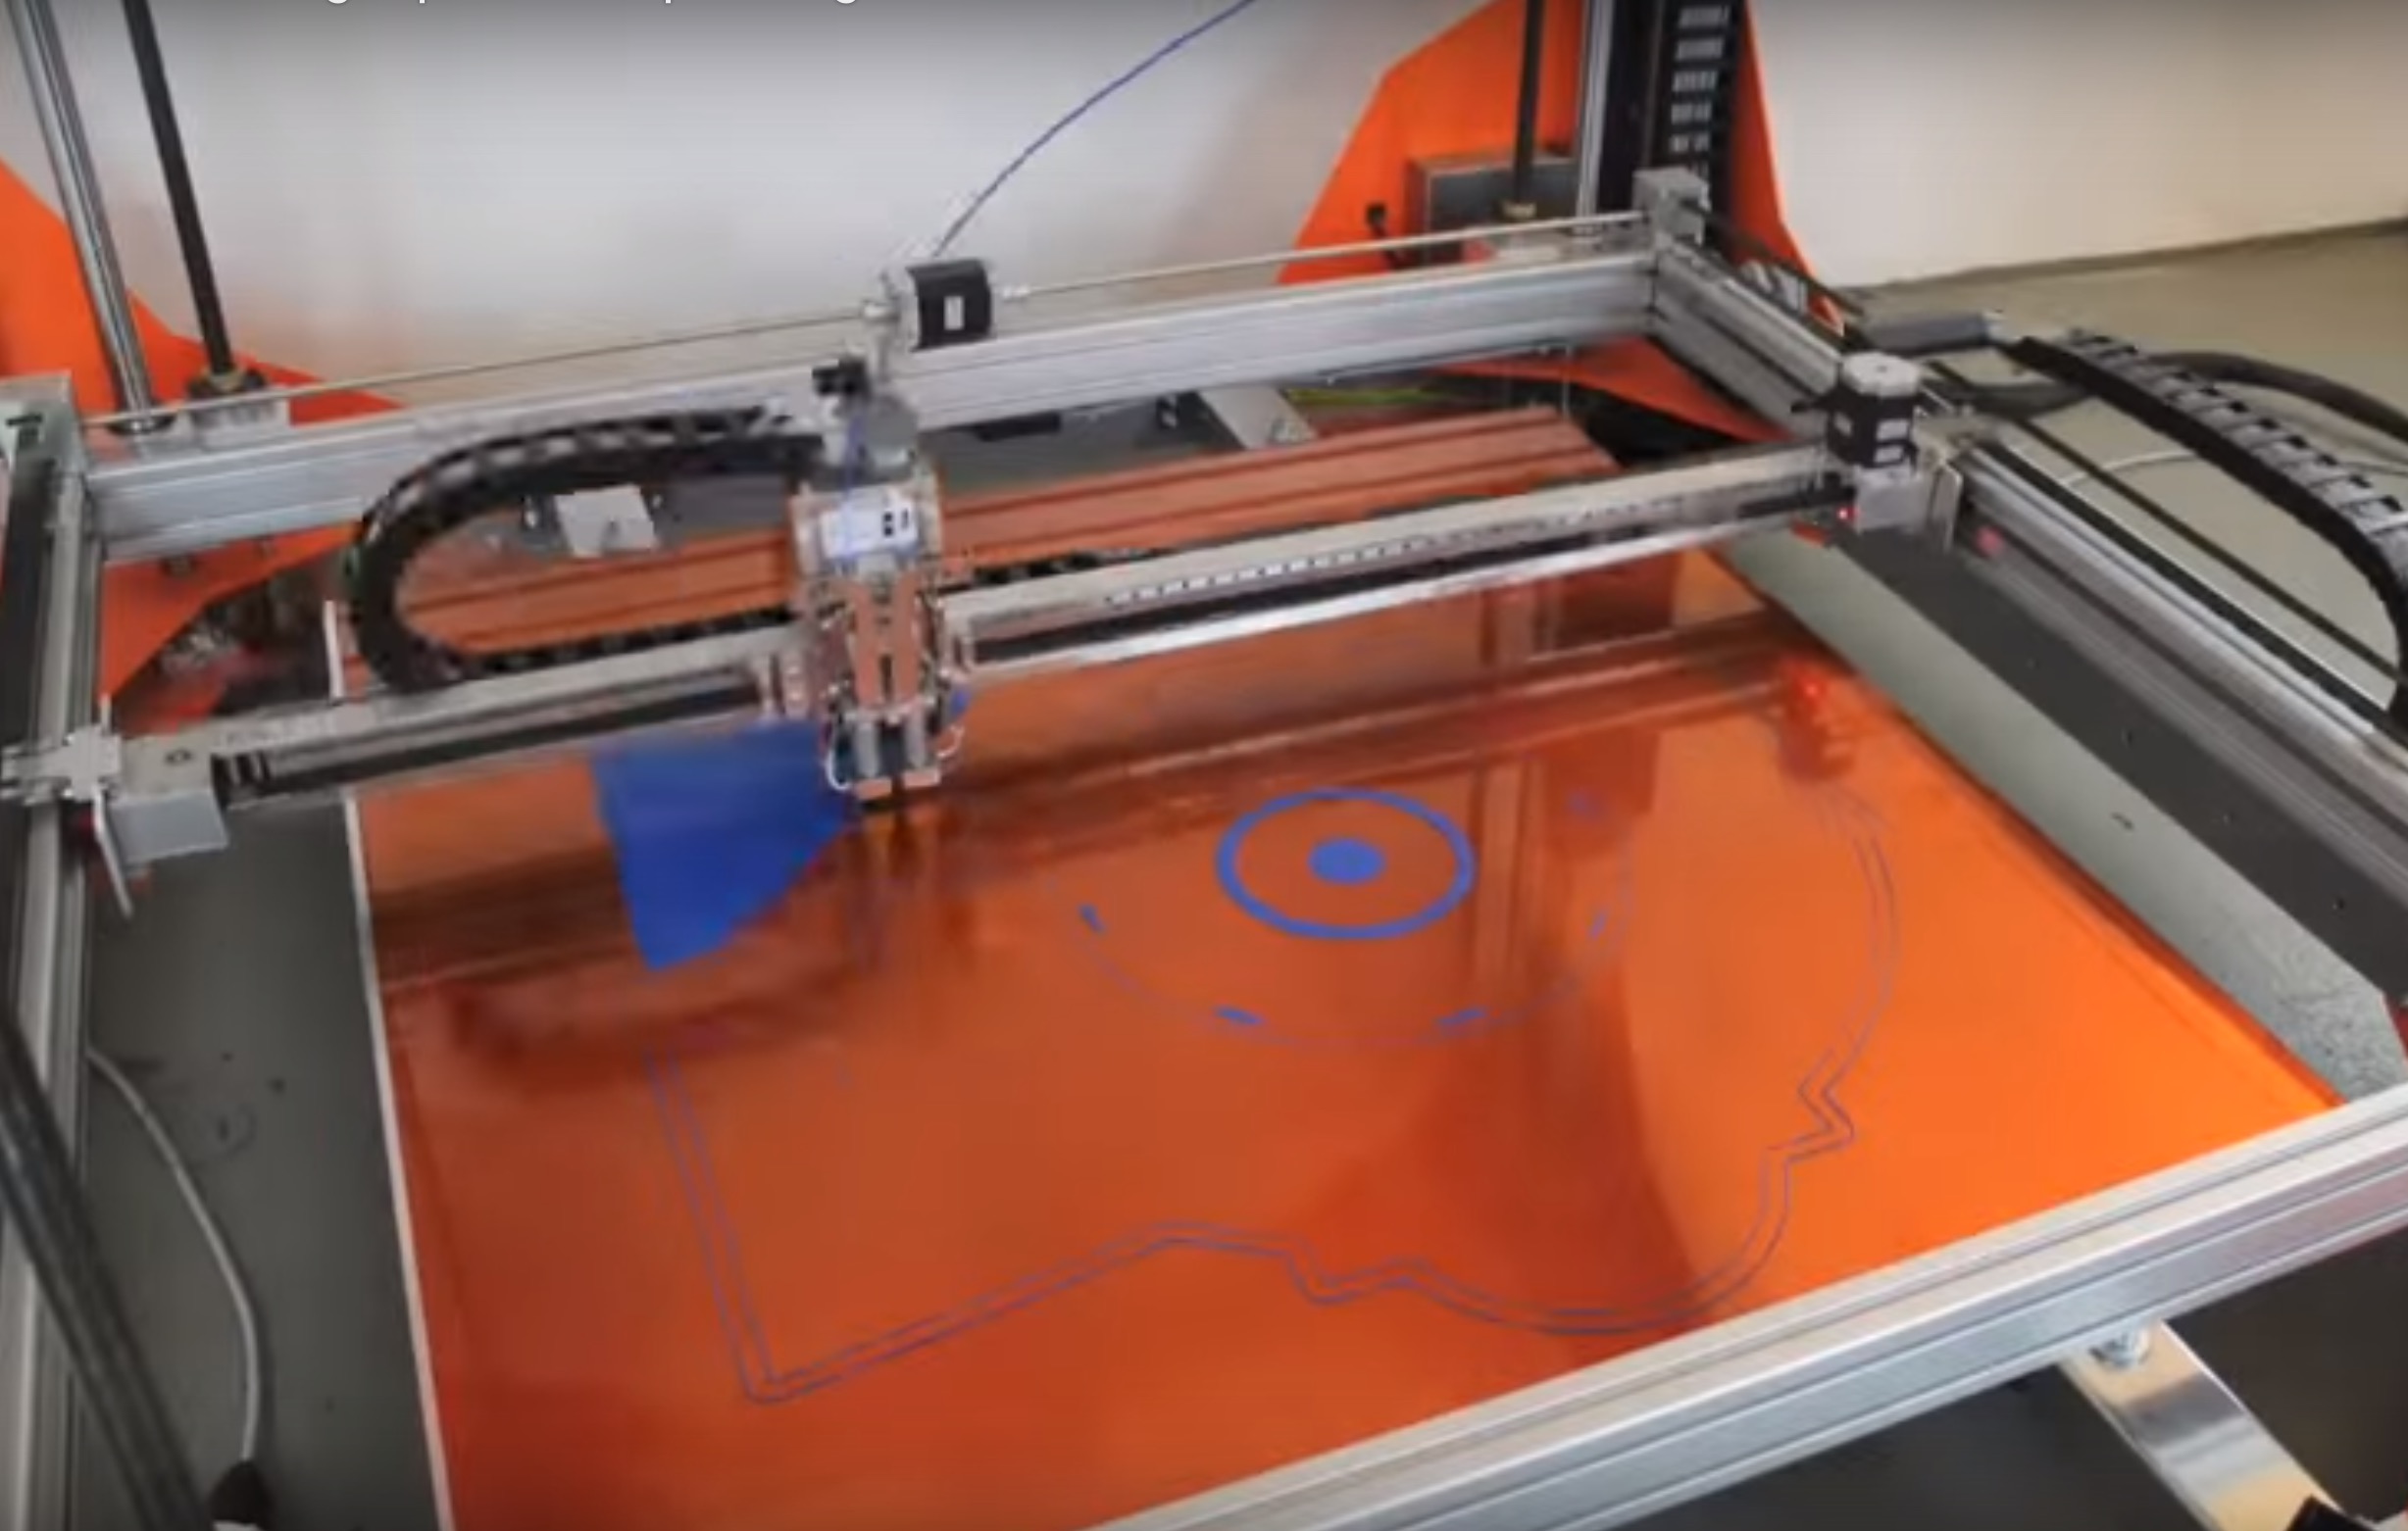 BigRep Optimizes “One” Printer For Large-Scale 3D Printing Fabbaloo